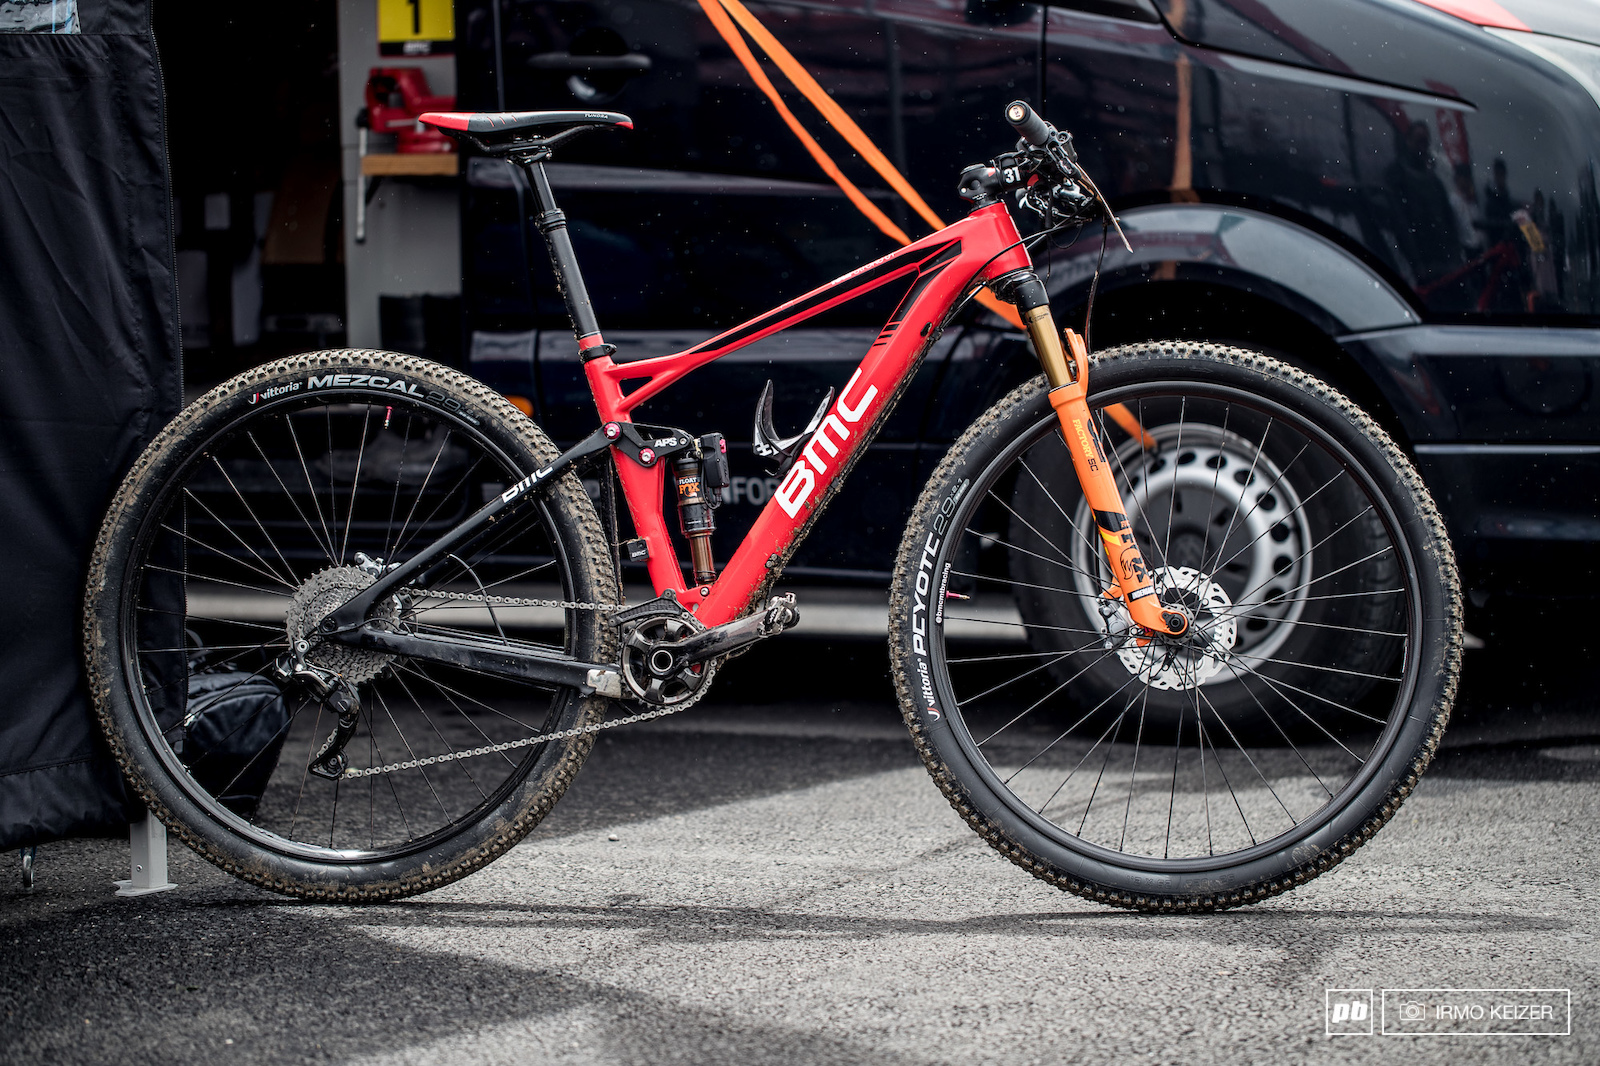 Reto Indergand's Fourstroke 01. Full electronic intregration of the Shimano XTR Di2 drivetrain and the Fox suspension.